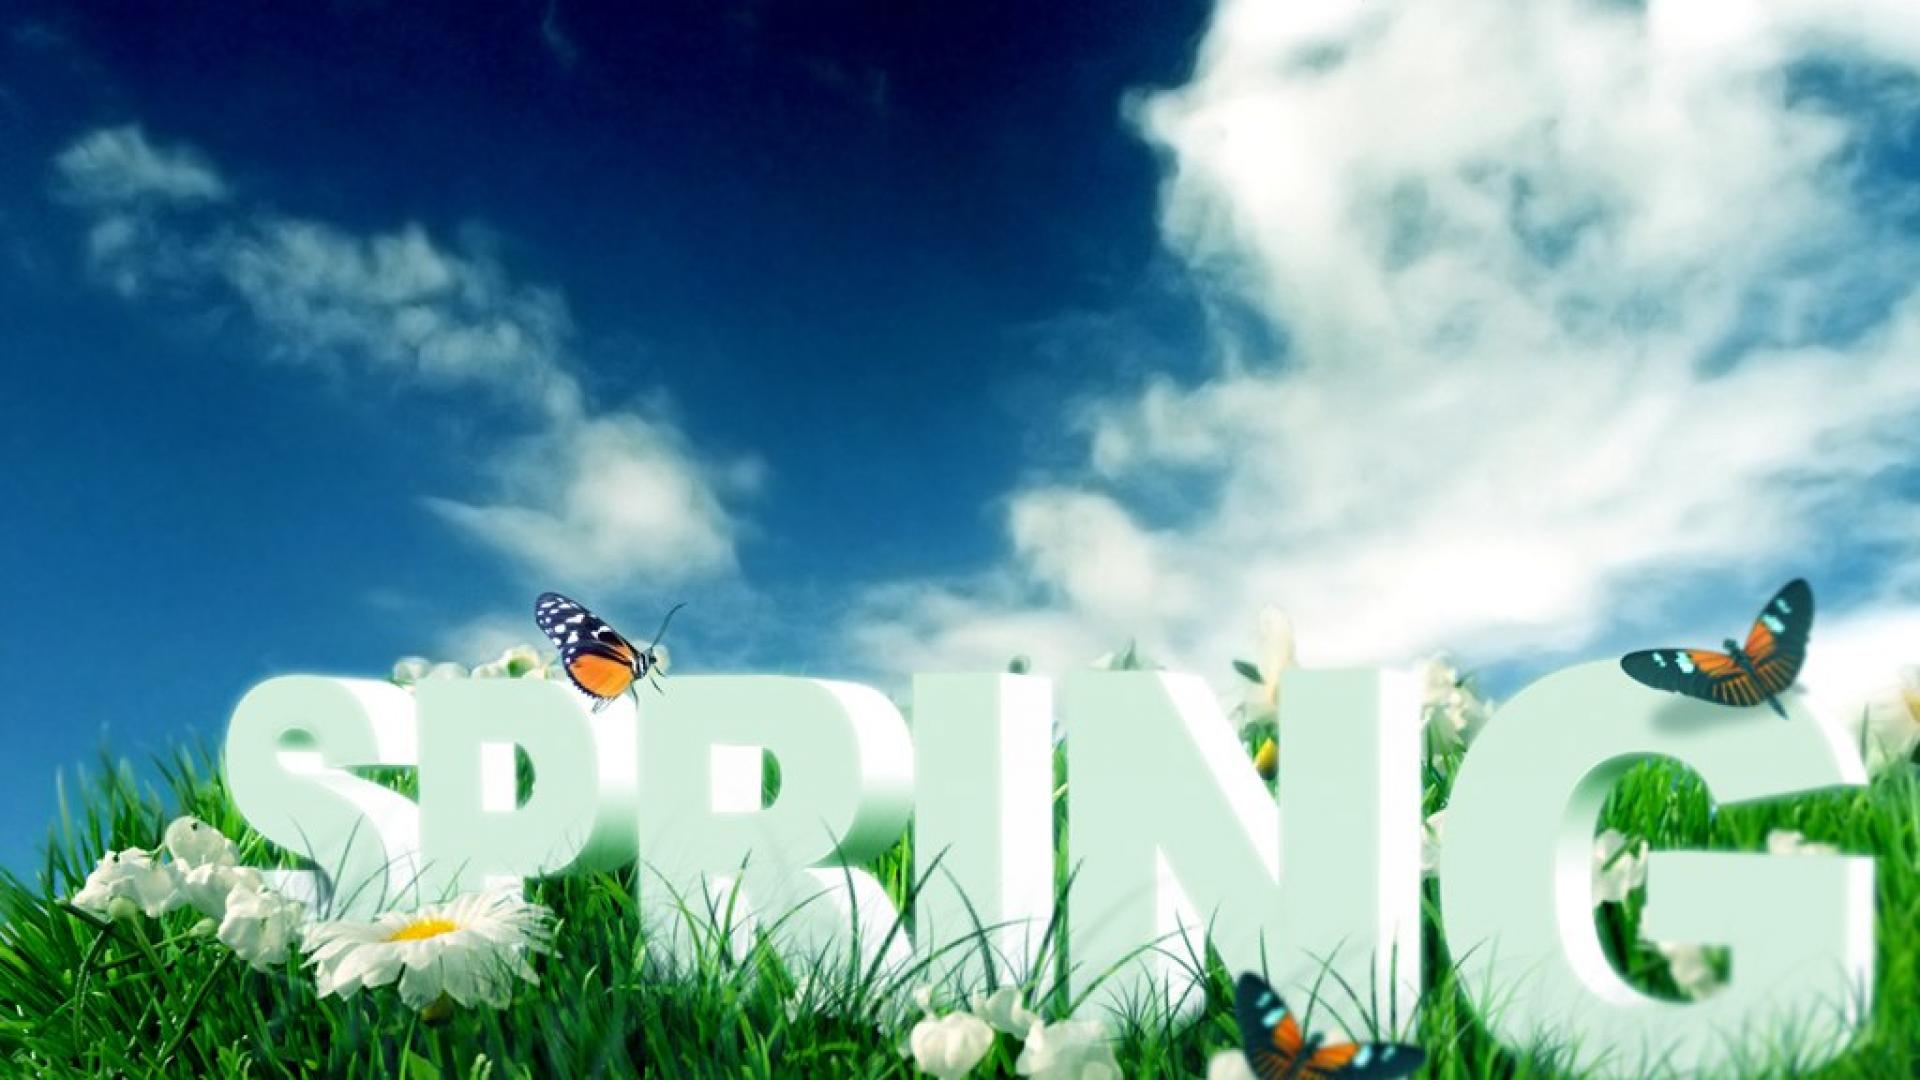 Abstract Spring Flower 3d Wallpaper Butterfly Hq